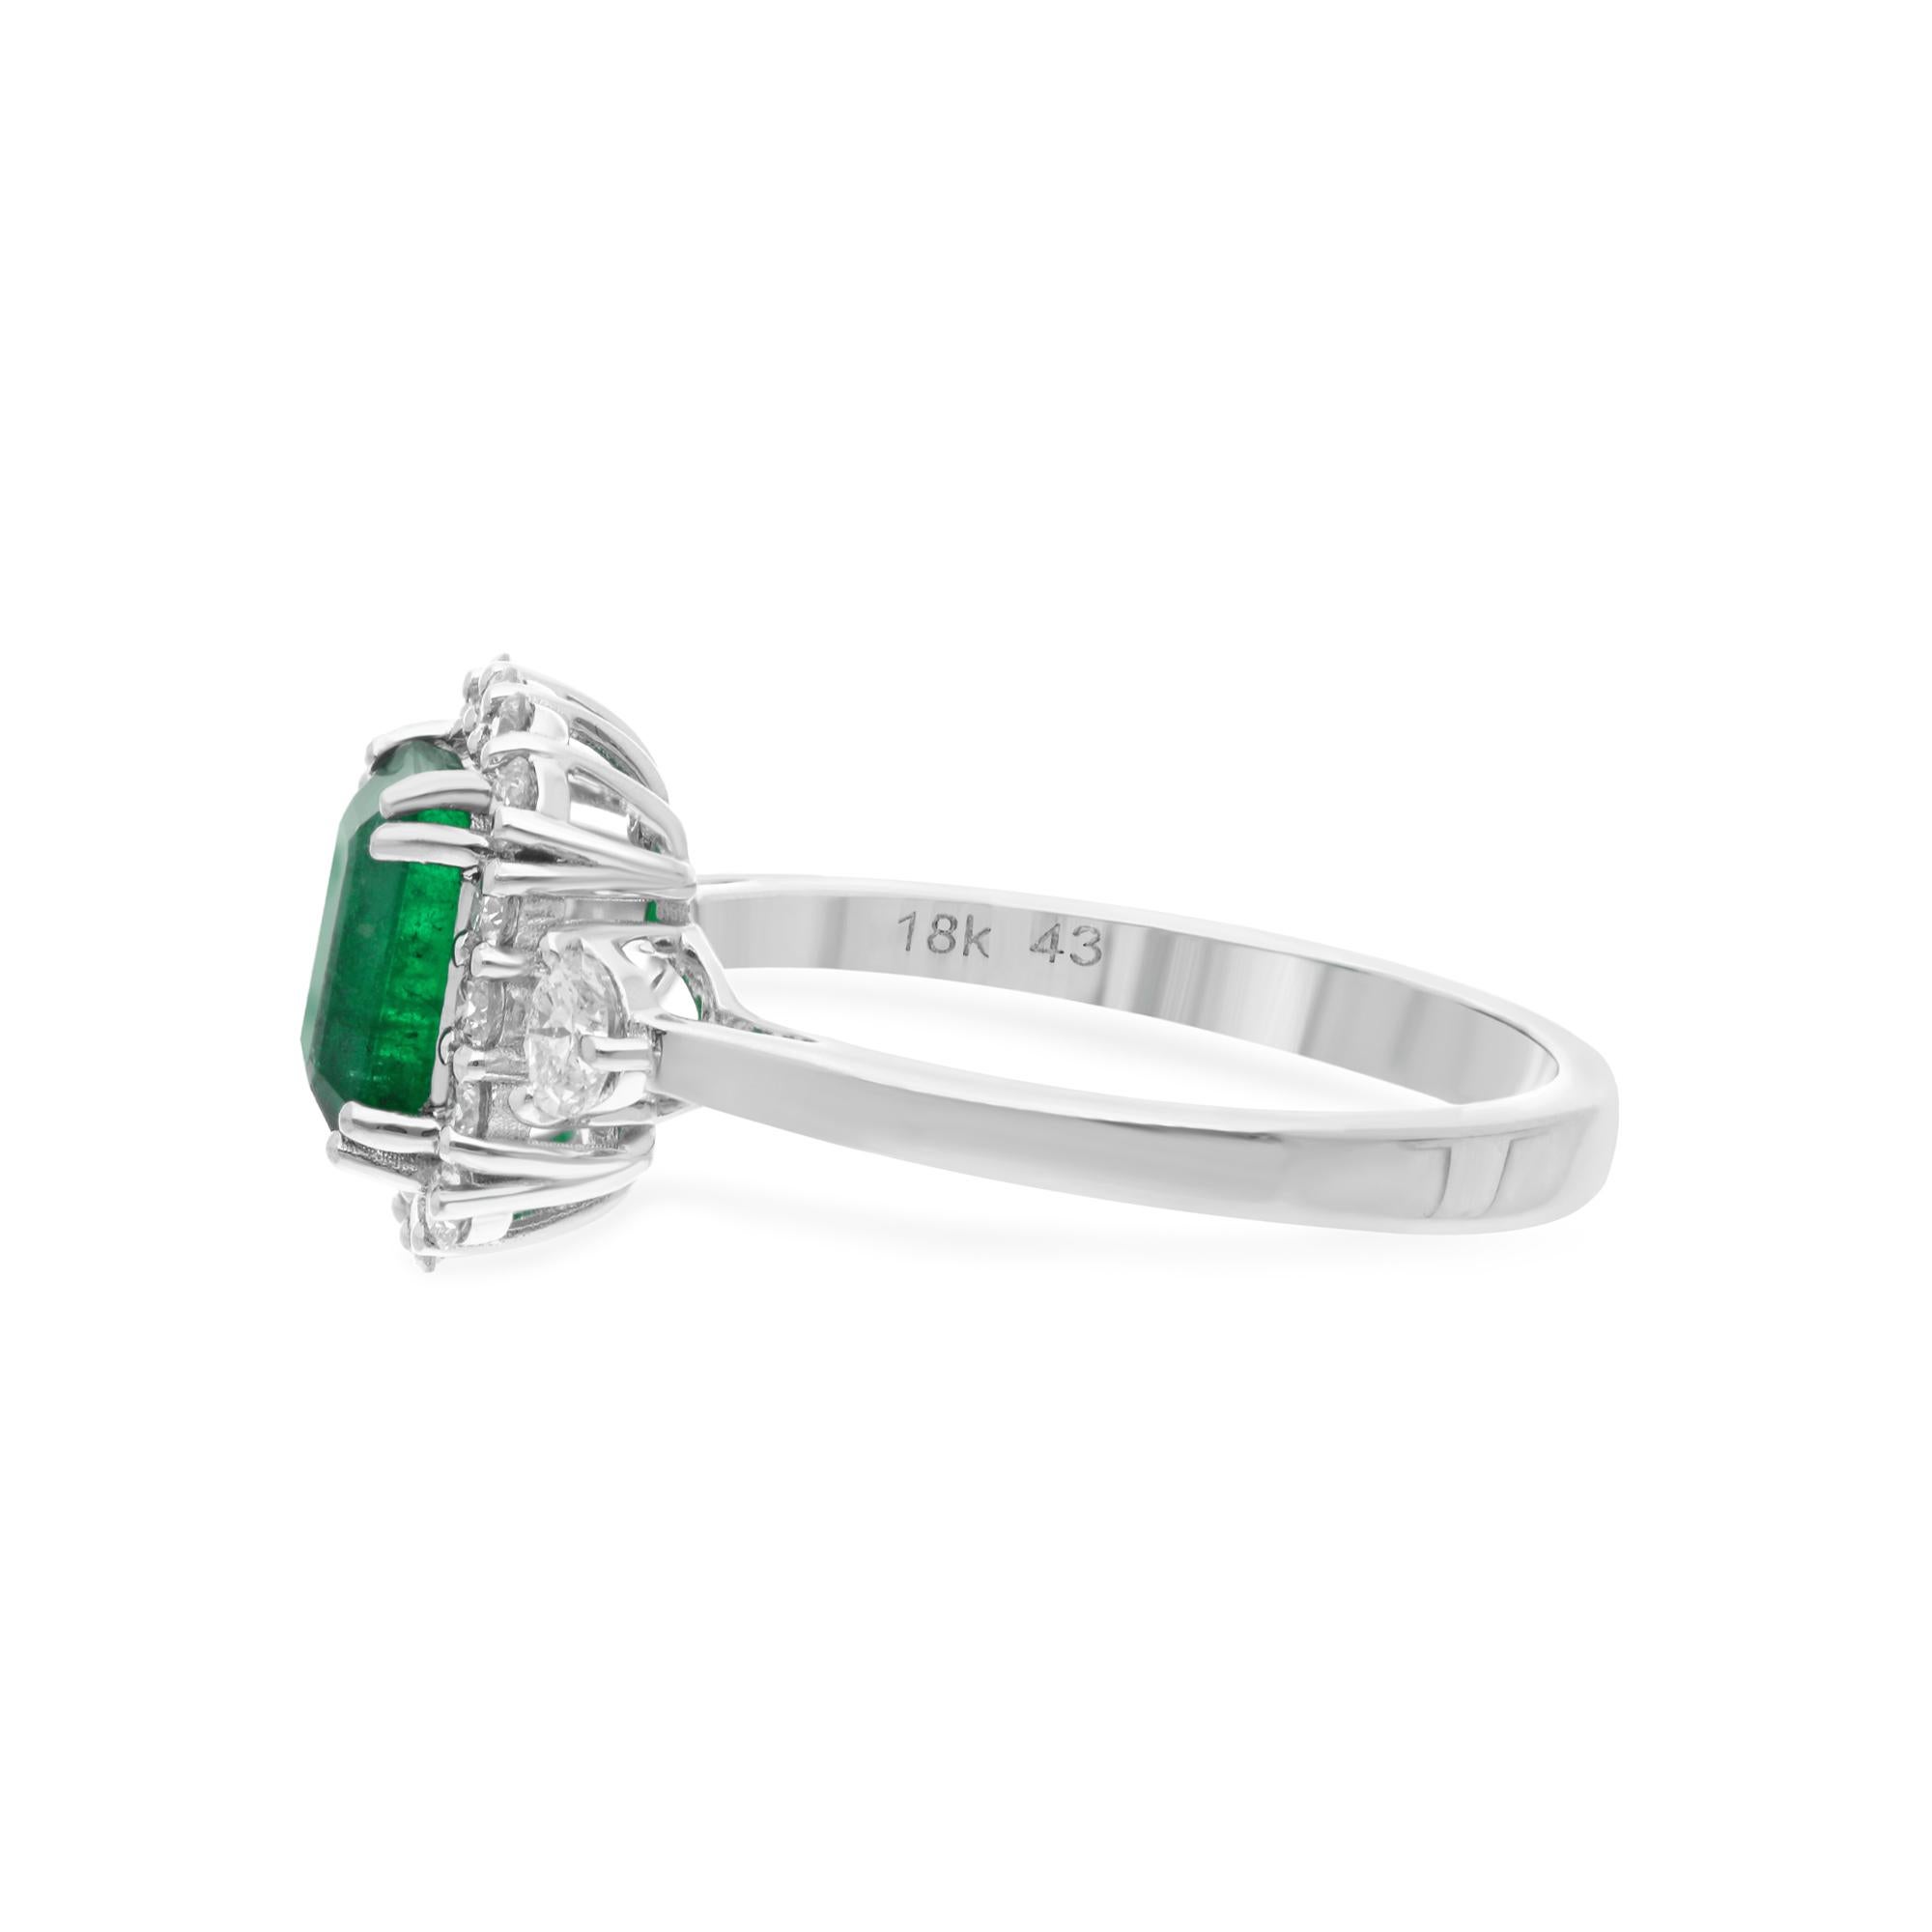 Step into the spotlight with the mesmerizing allure of the Zambian Emerald Gemstone Cocktail Ring adorned with Diamonds, crafted in luxurious 18 Karat White Gold. This exquisite ring is a true statement piece, designed to captivate the eye and adorn